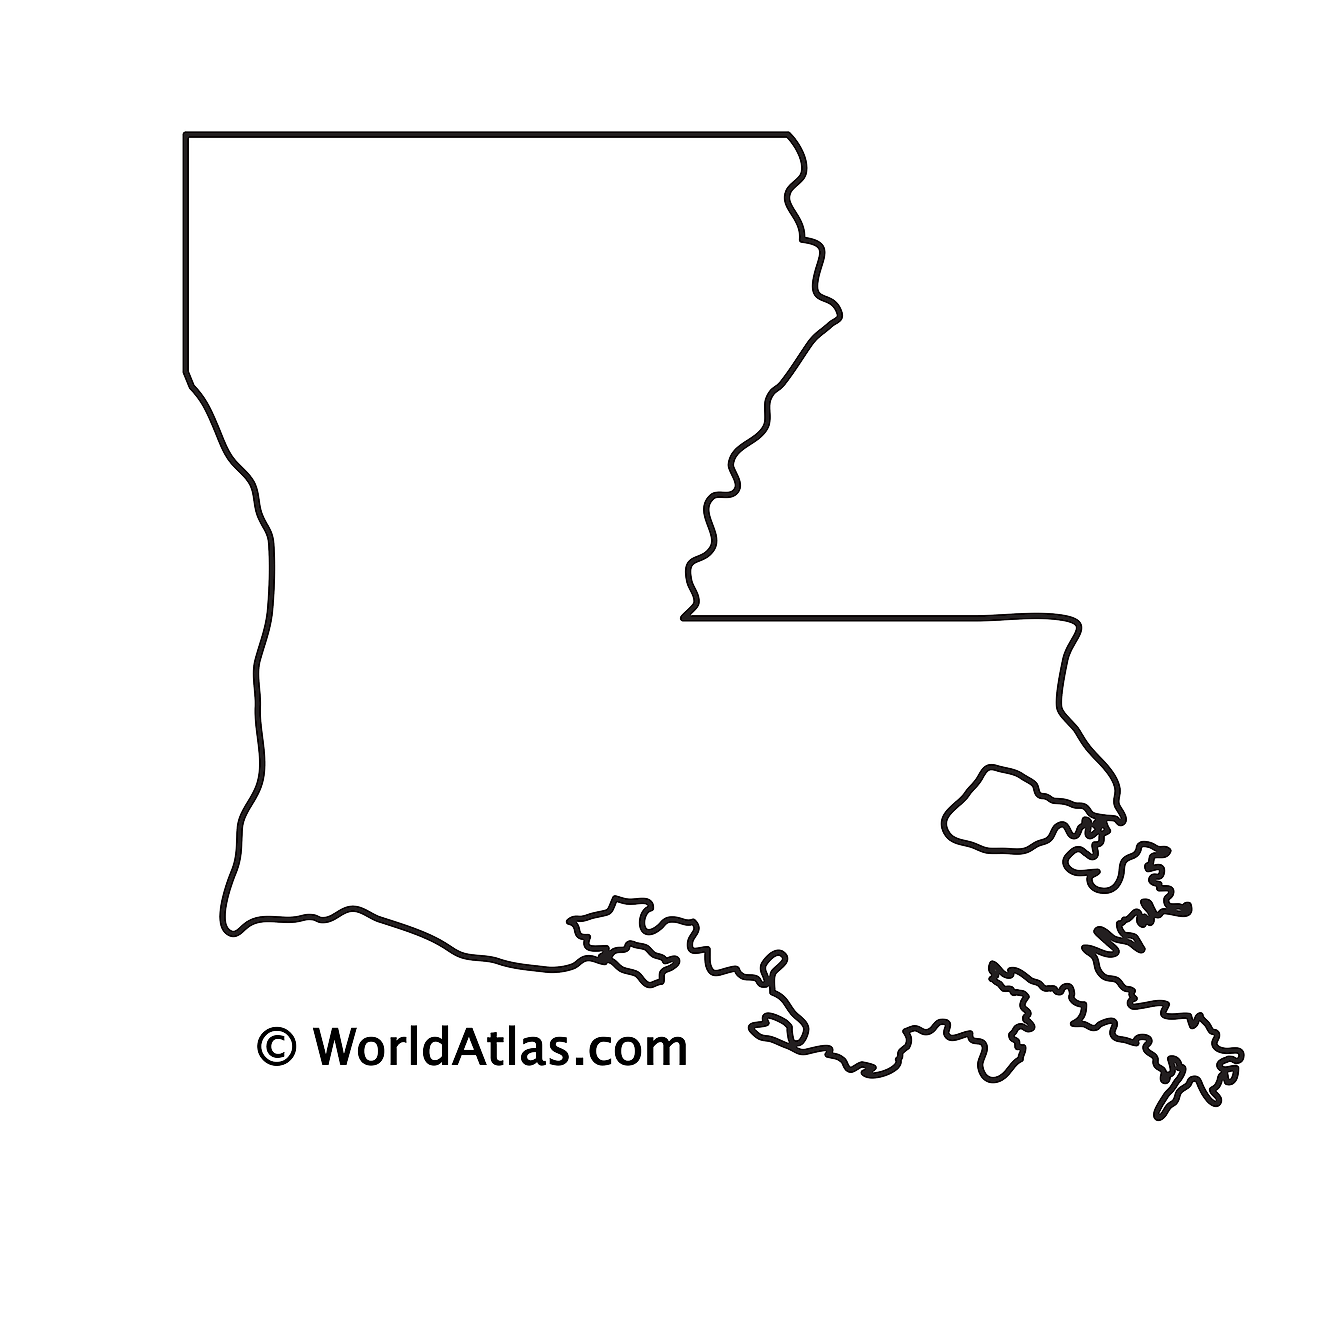 Blank Outline Map of Louisiana